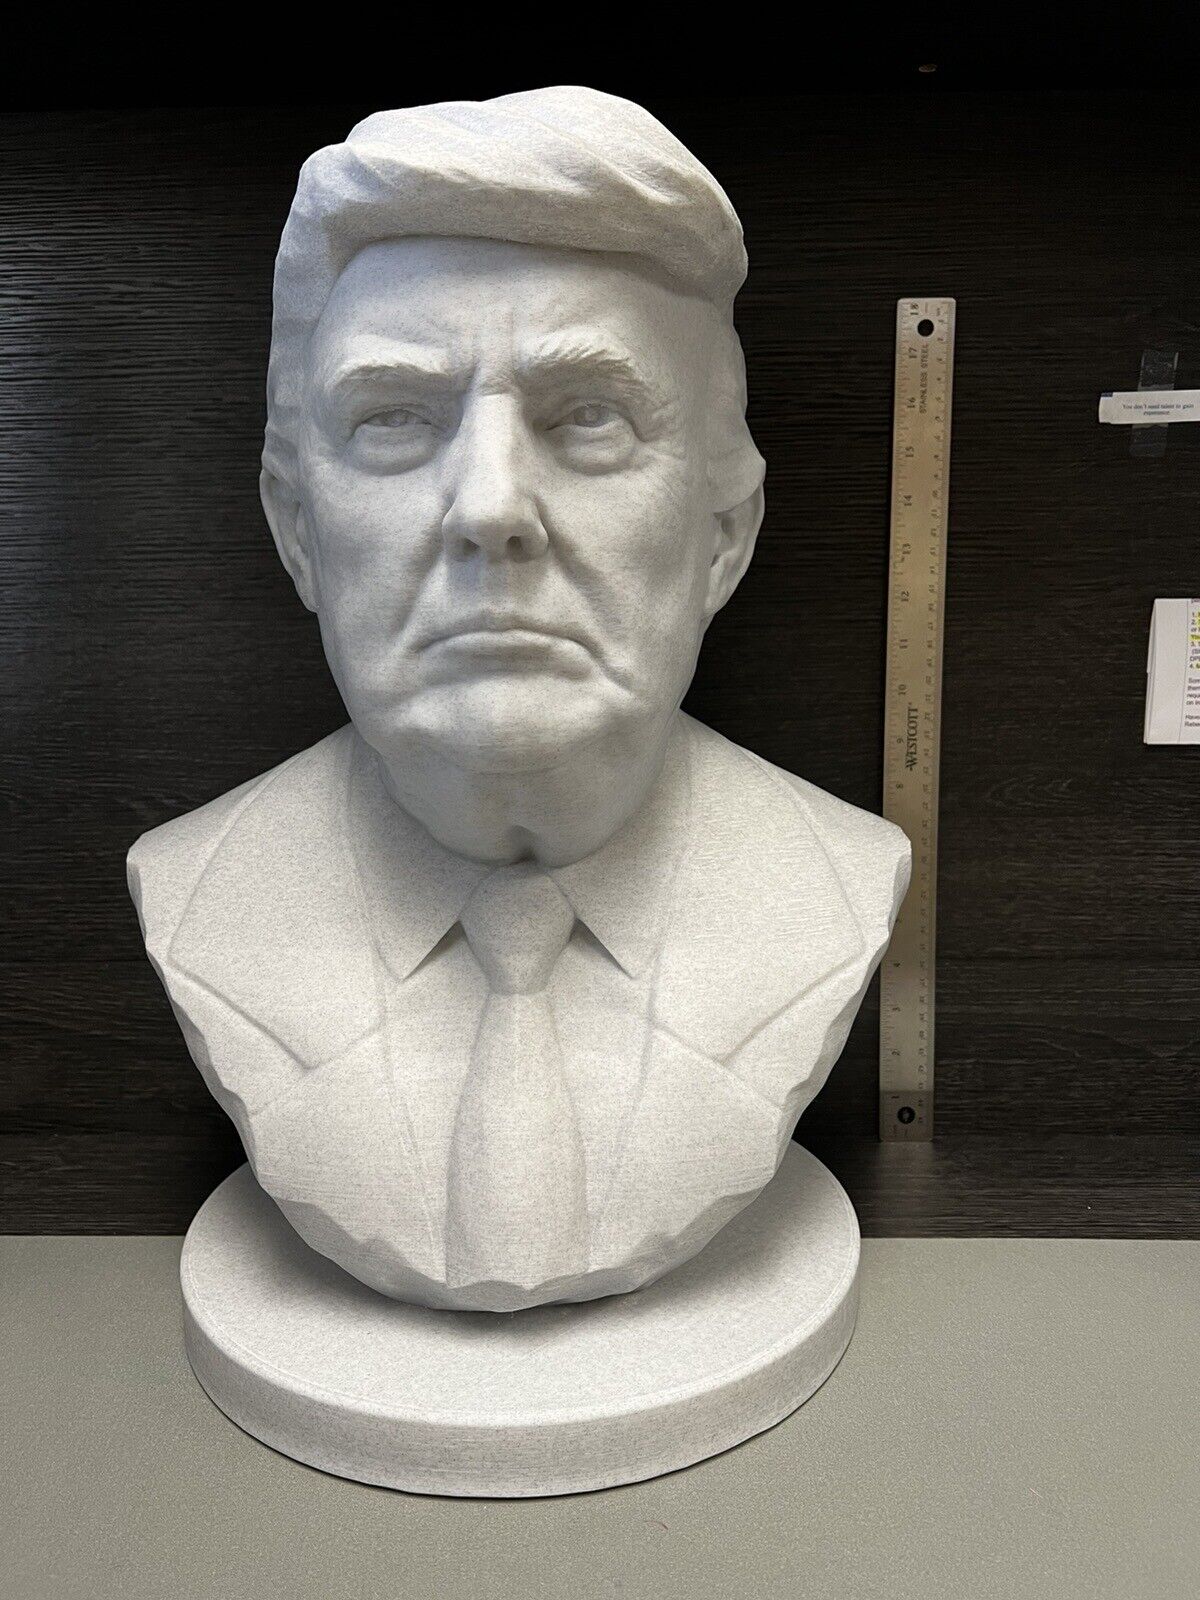 478MM TALL LIFE SIZEPresident Donald Trump Bust Marble 1ftx1ftx1.7ft HUUUUUUUGE